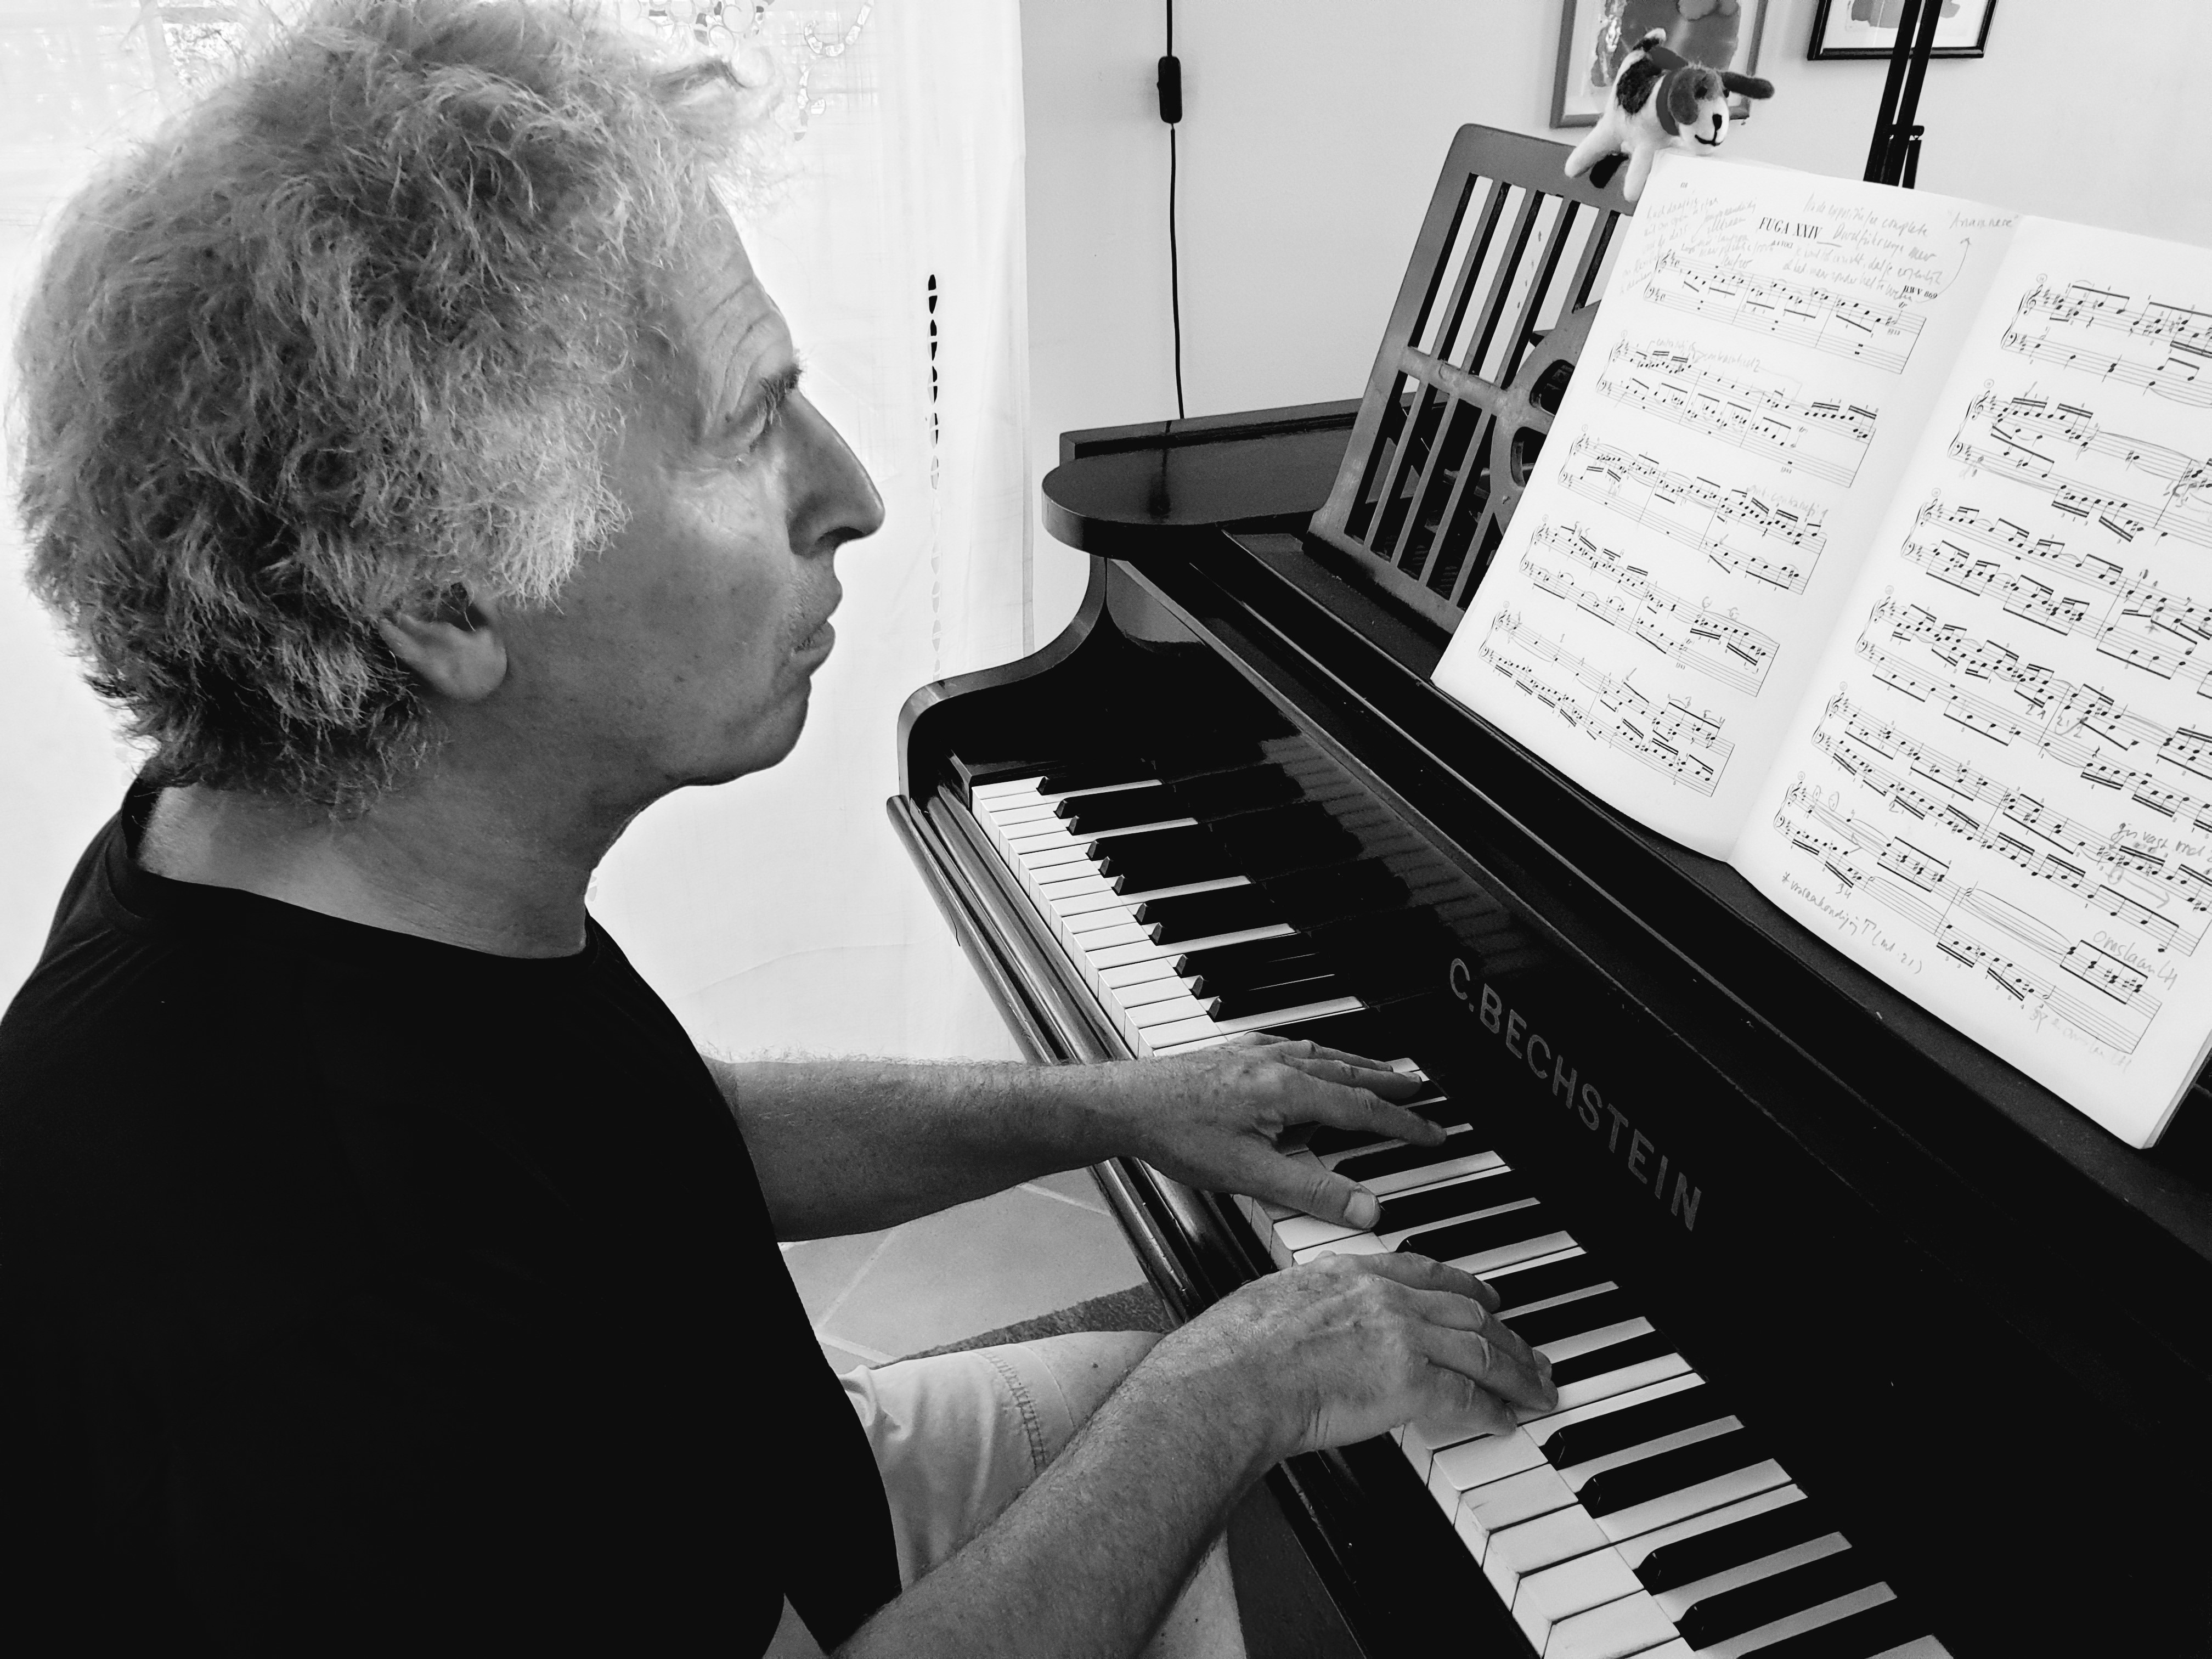 Pianist Marcel Worms – www.marcelworms.com